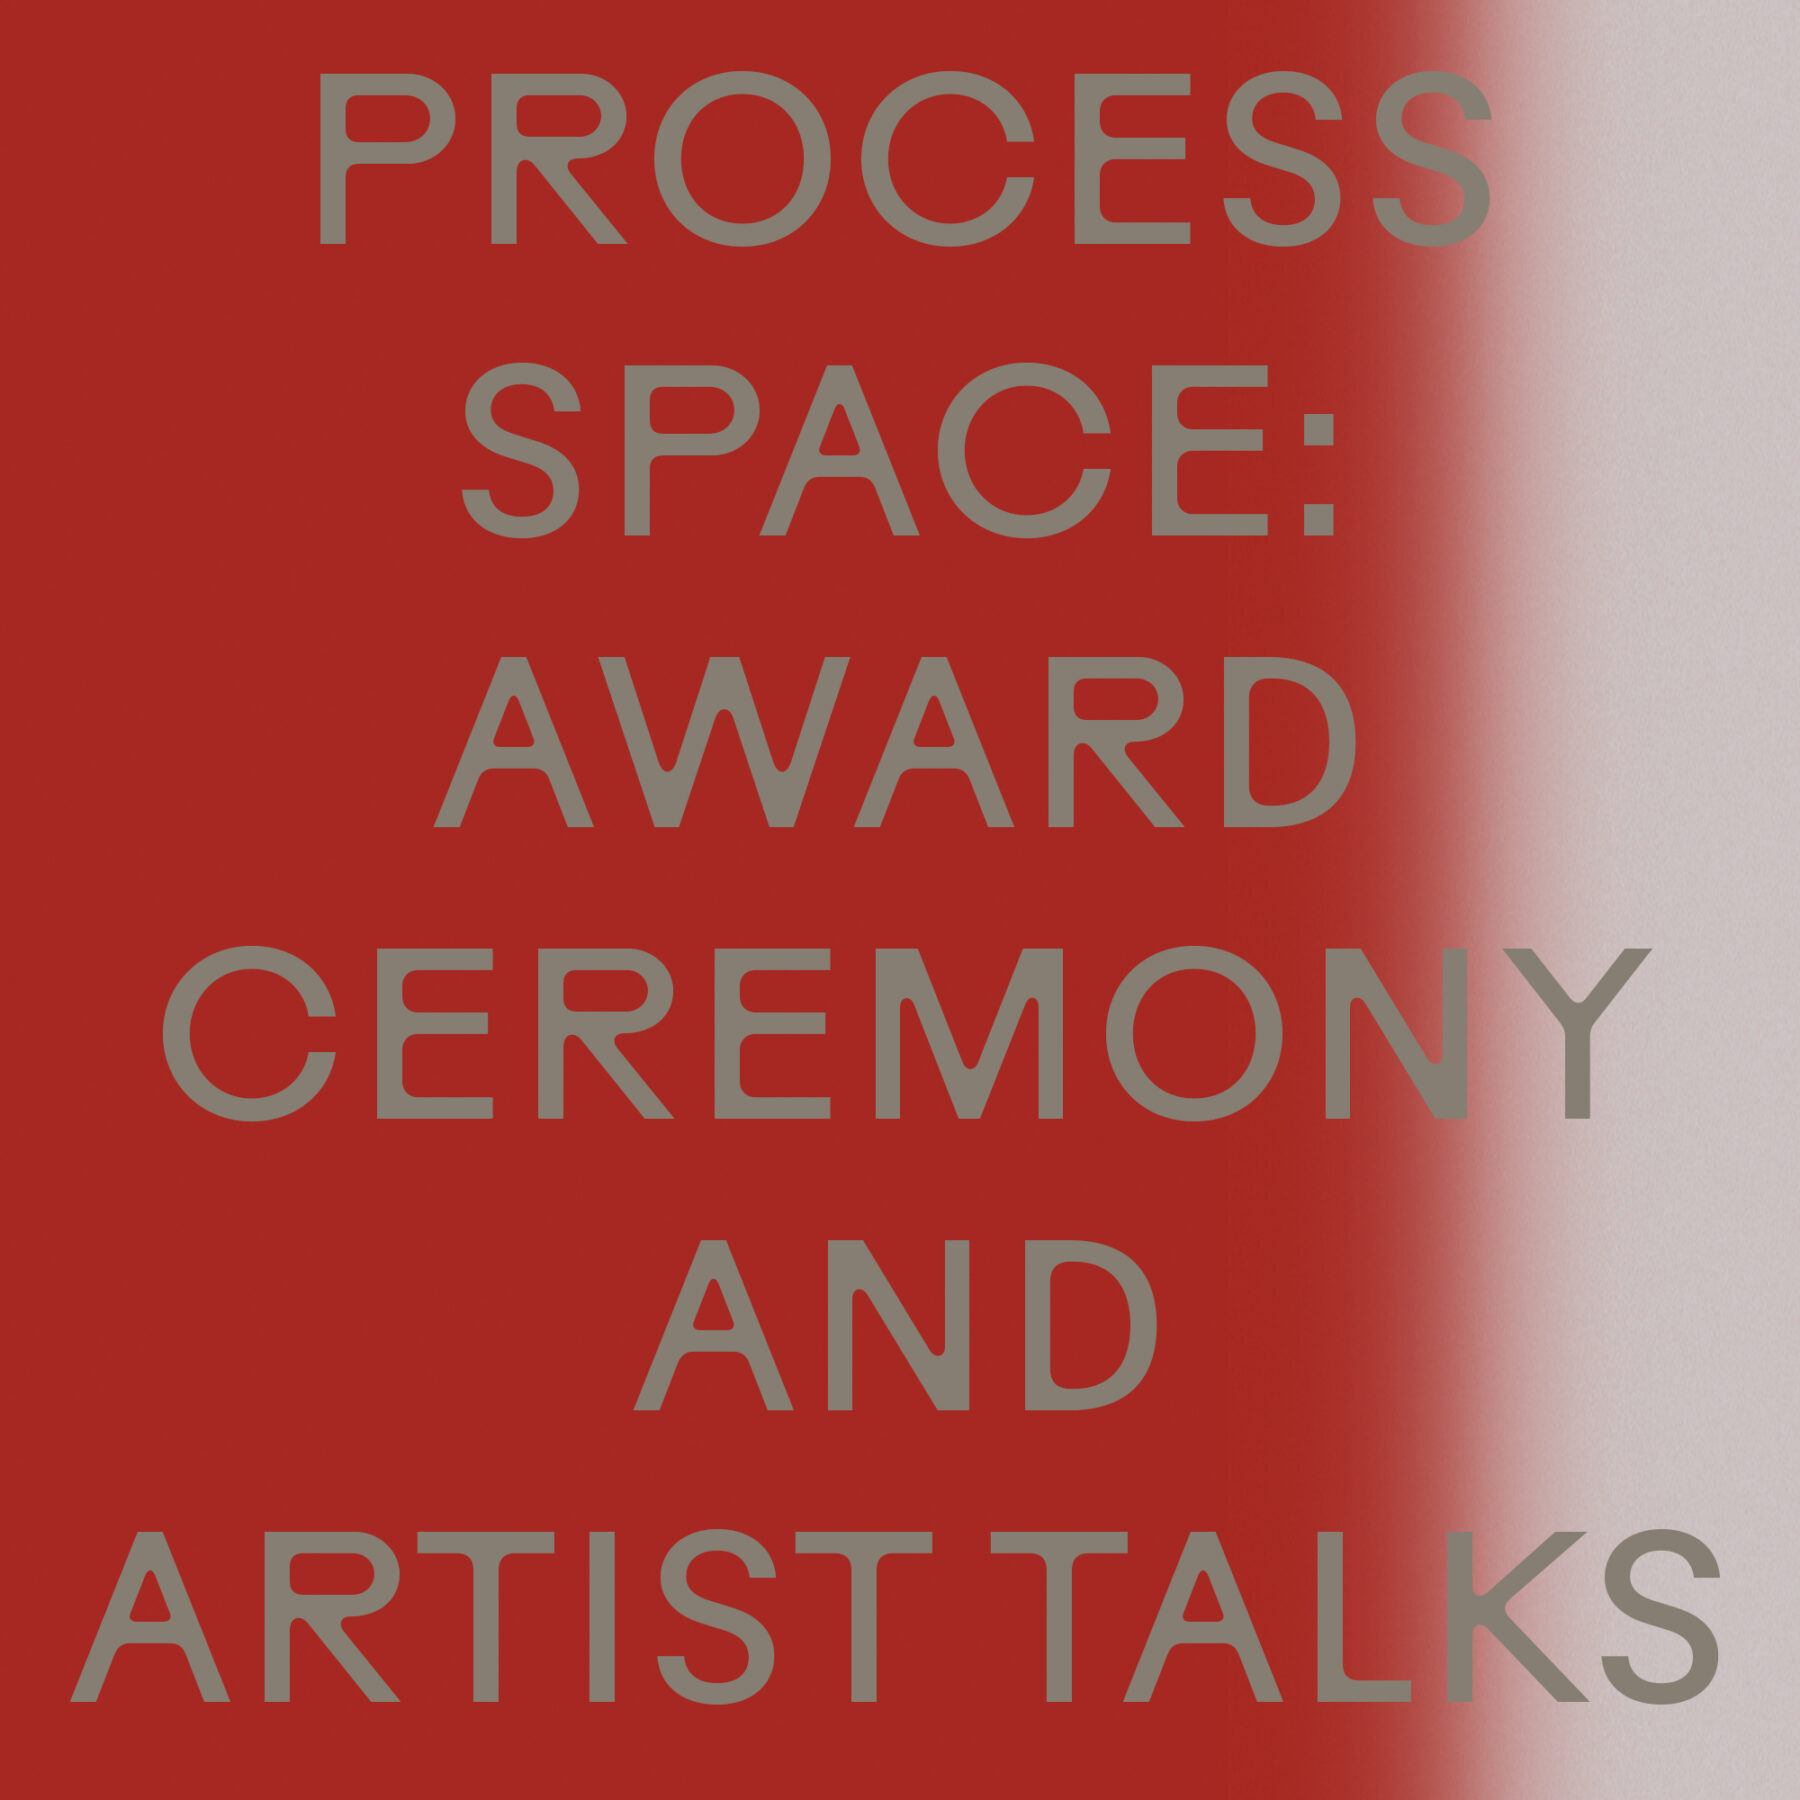 PROCESS SPACE: AWARD CEREMONY AND ARTIST TALKS